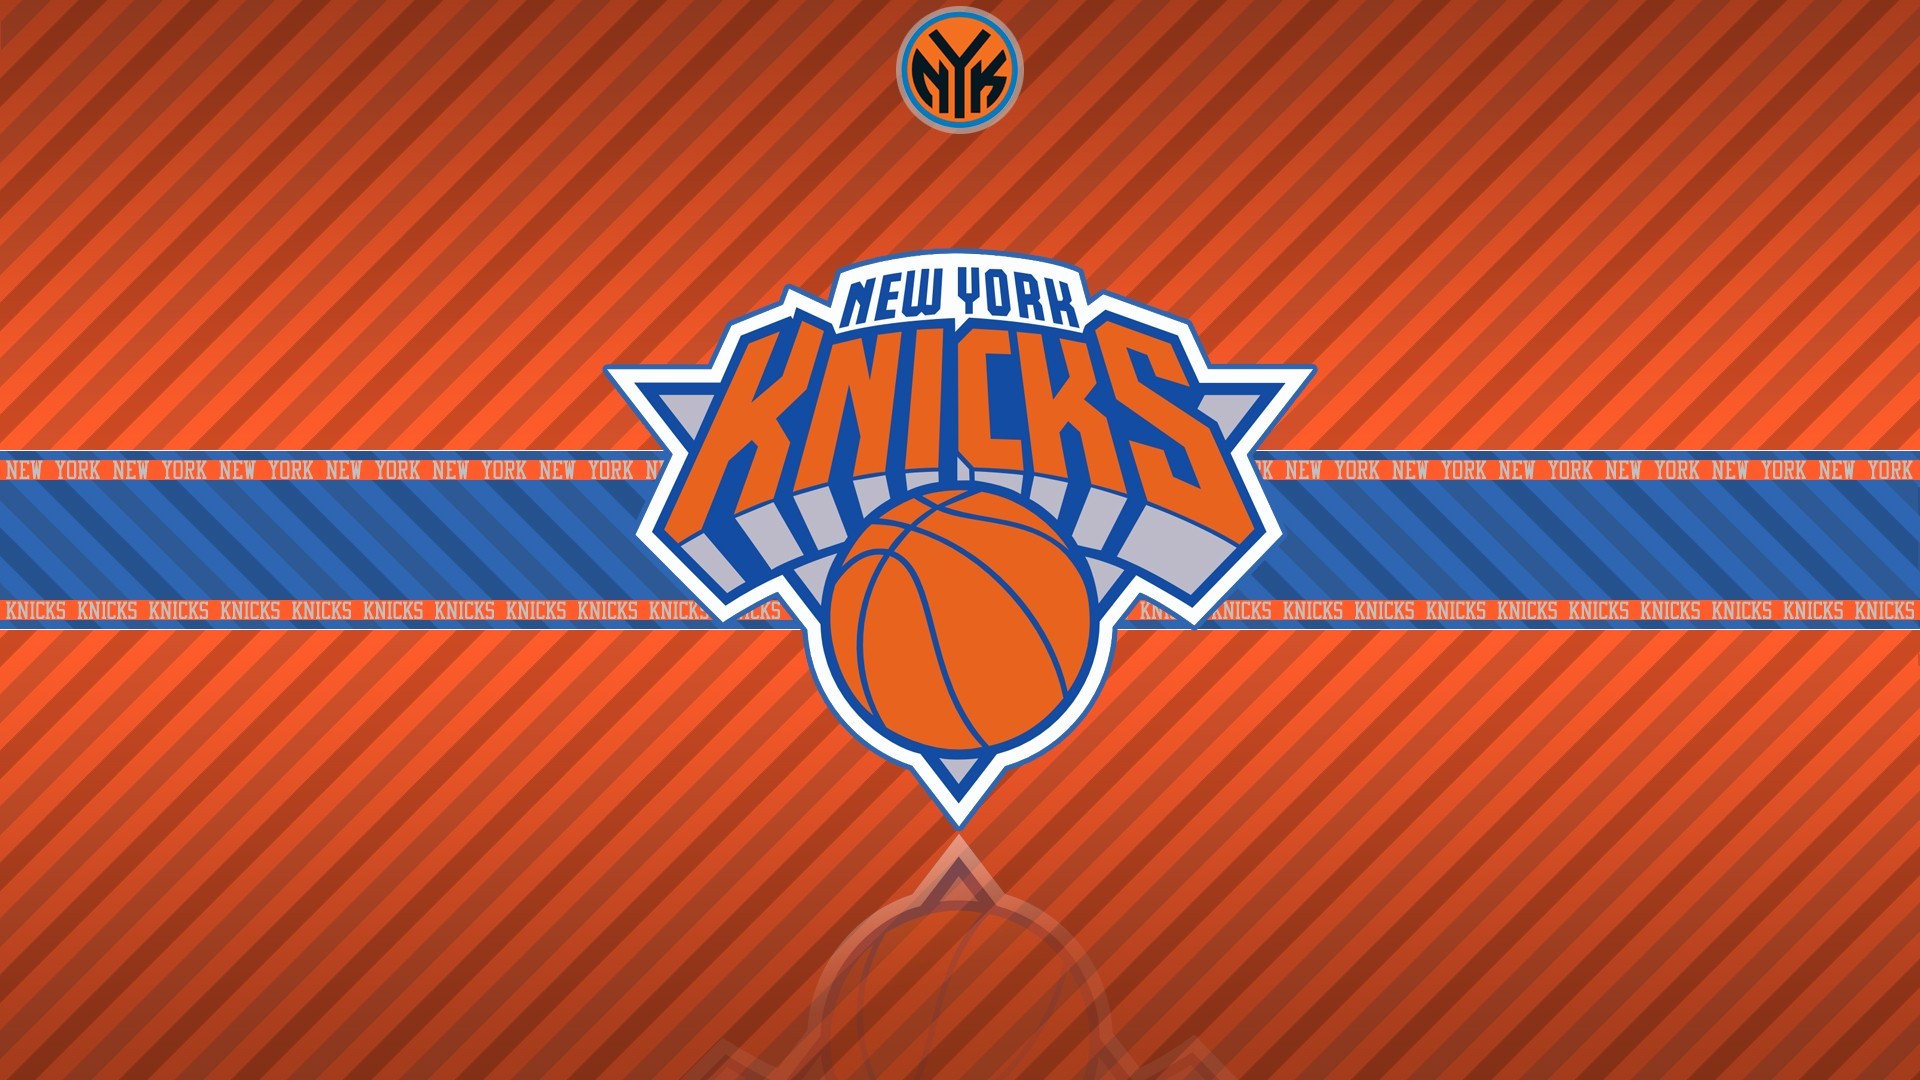 Knicks iPhone Wallpaper (66+ images)